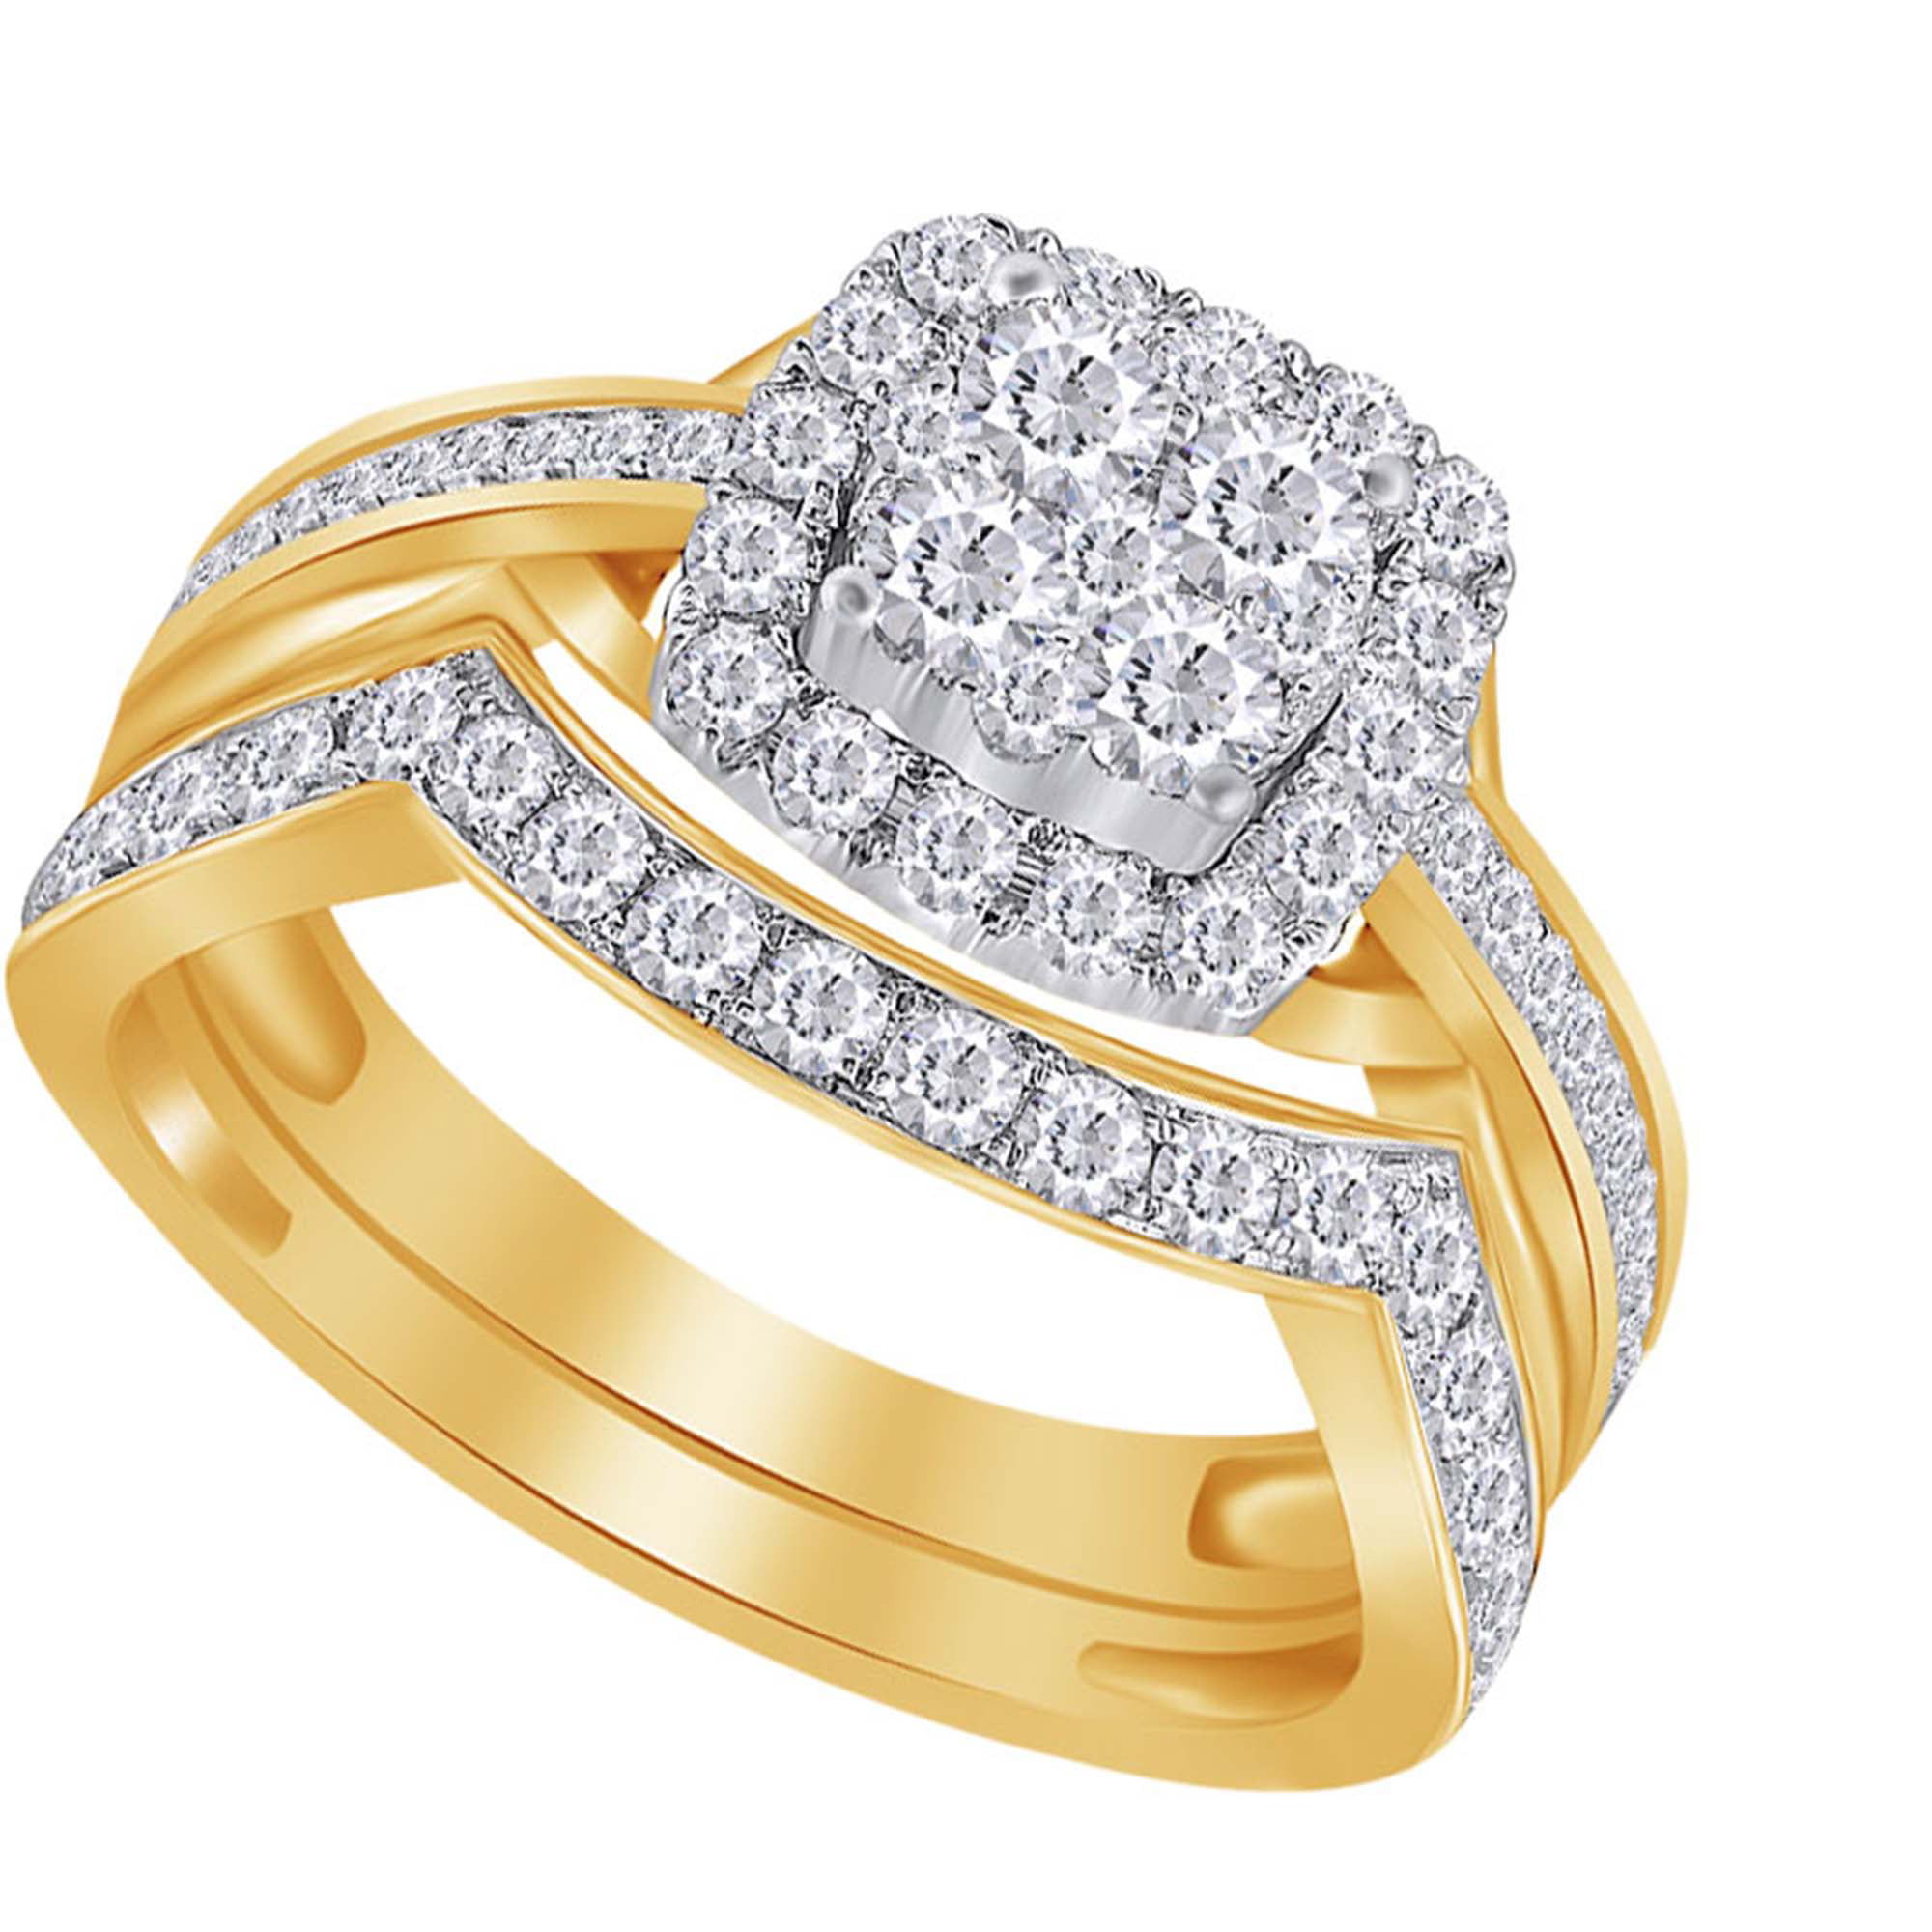 Size-5 1/6 cttw, Diamond Wedding Band in 10K Yellow Gold G-H,I2-I3